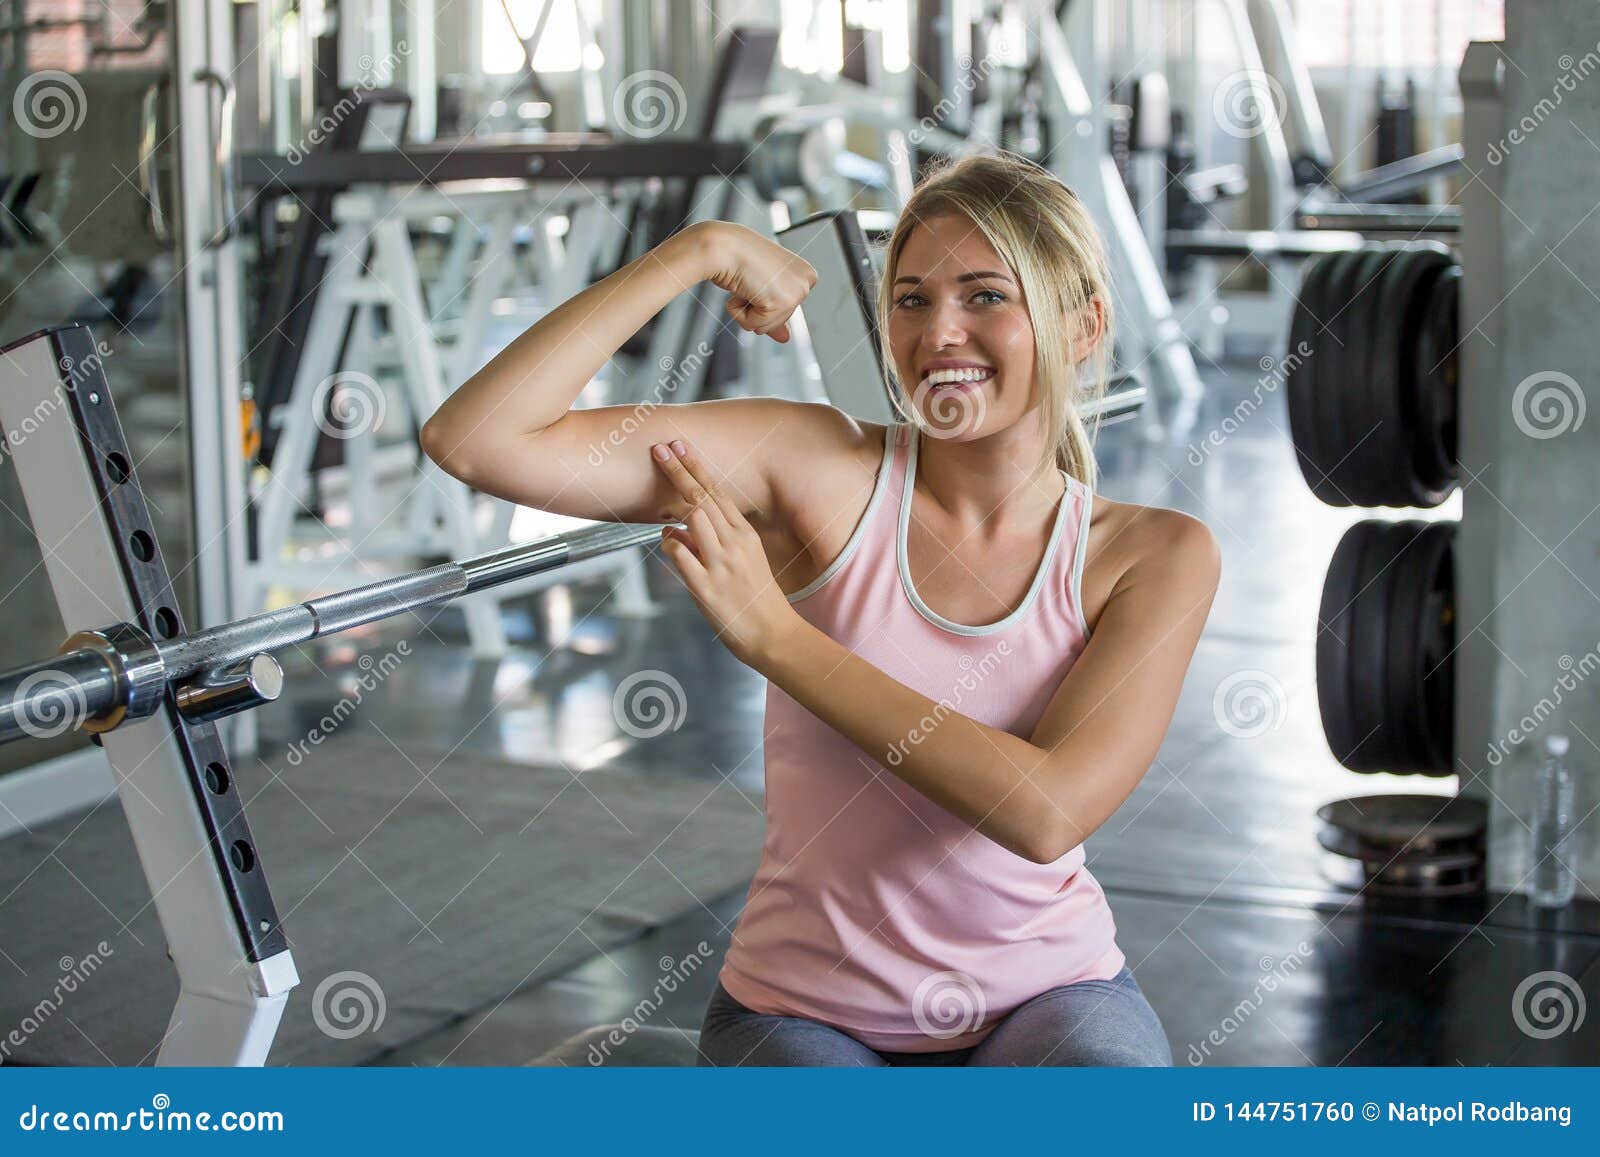 Portrait Of Young Sport Woman In Sportswear Posing Strong Showing Her Biceps Muscular Arms In